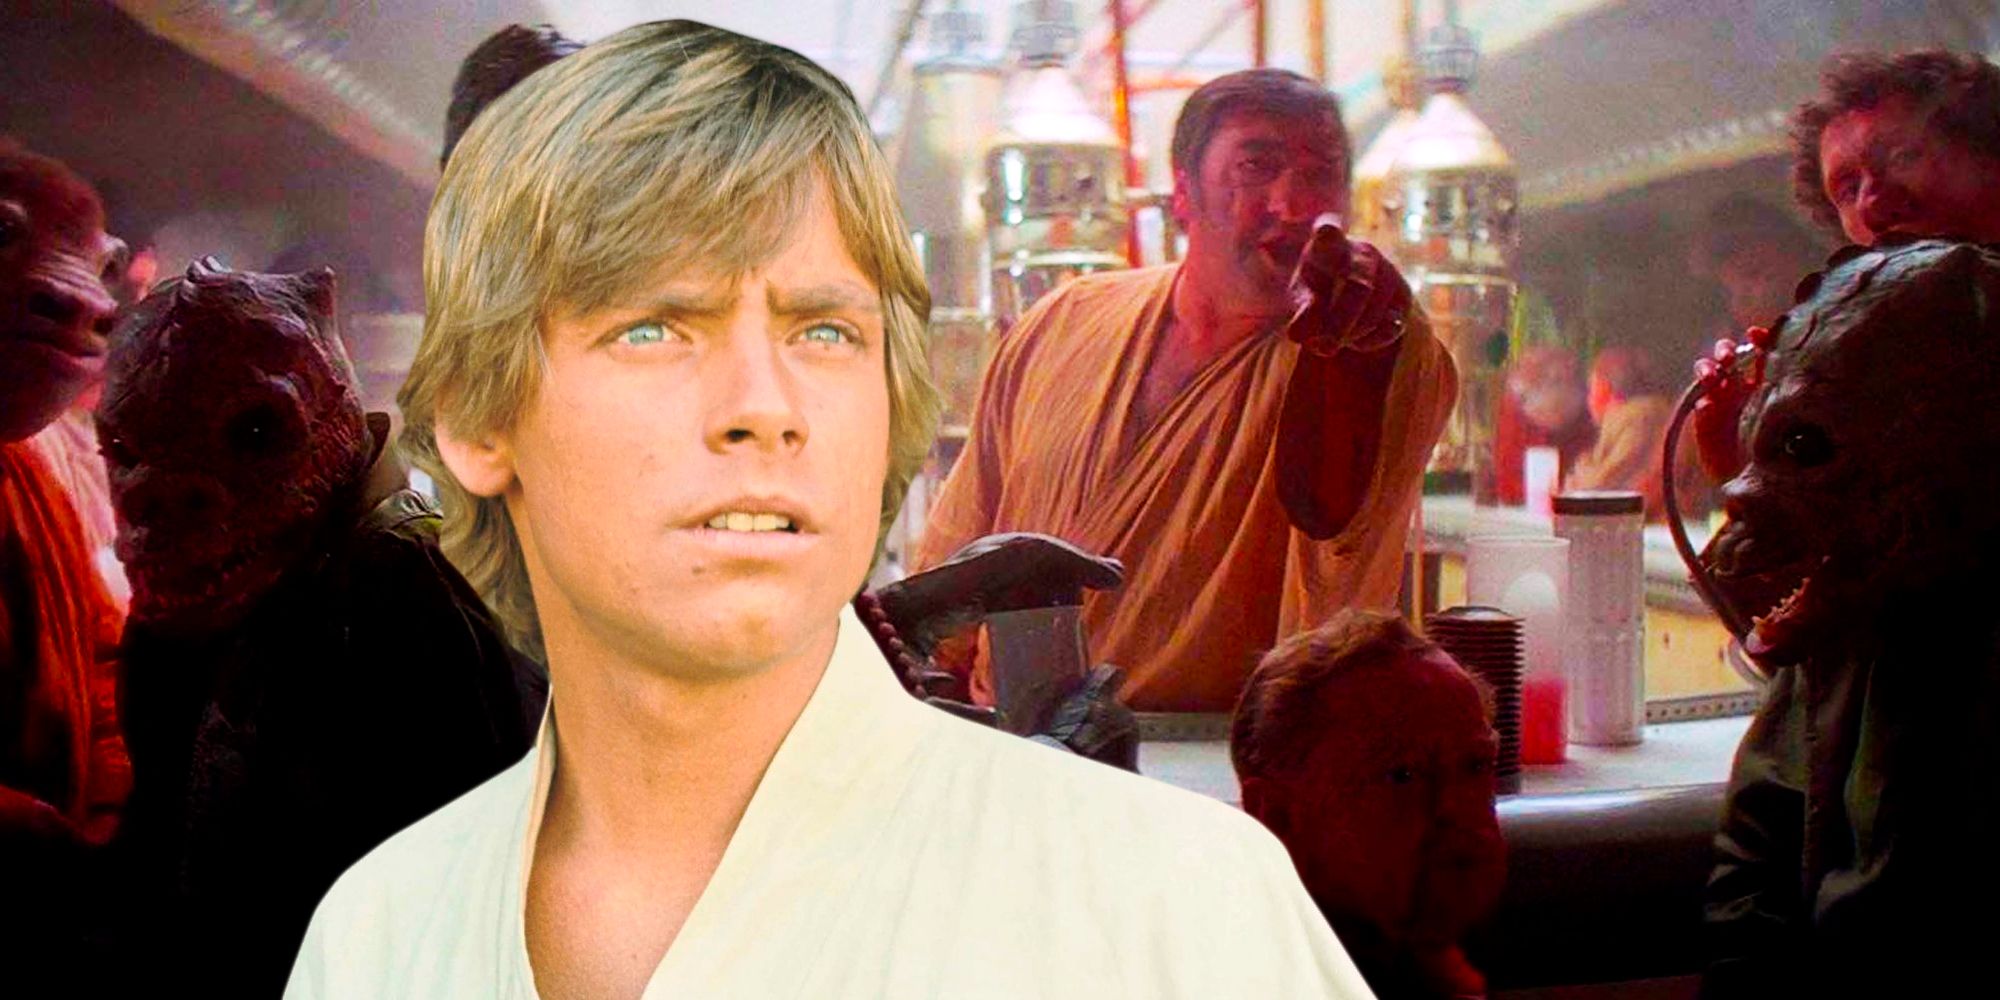 Mark Hamill as Luke Skywalker and the Tatootine Cantina Scene in A New Hope